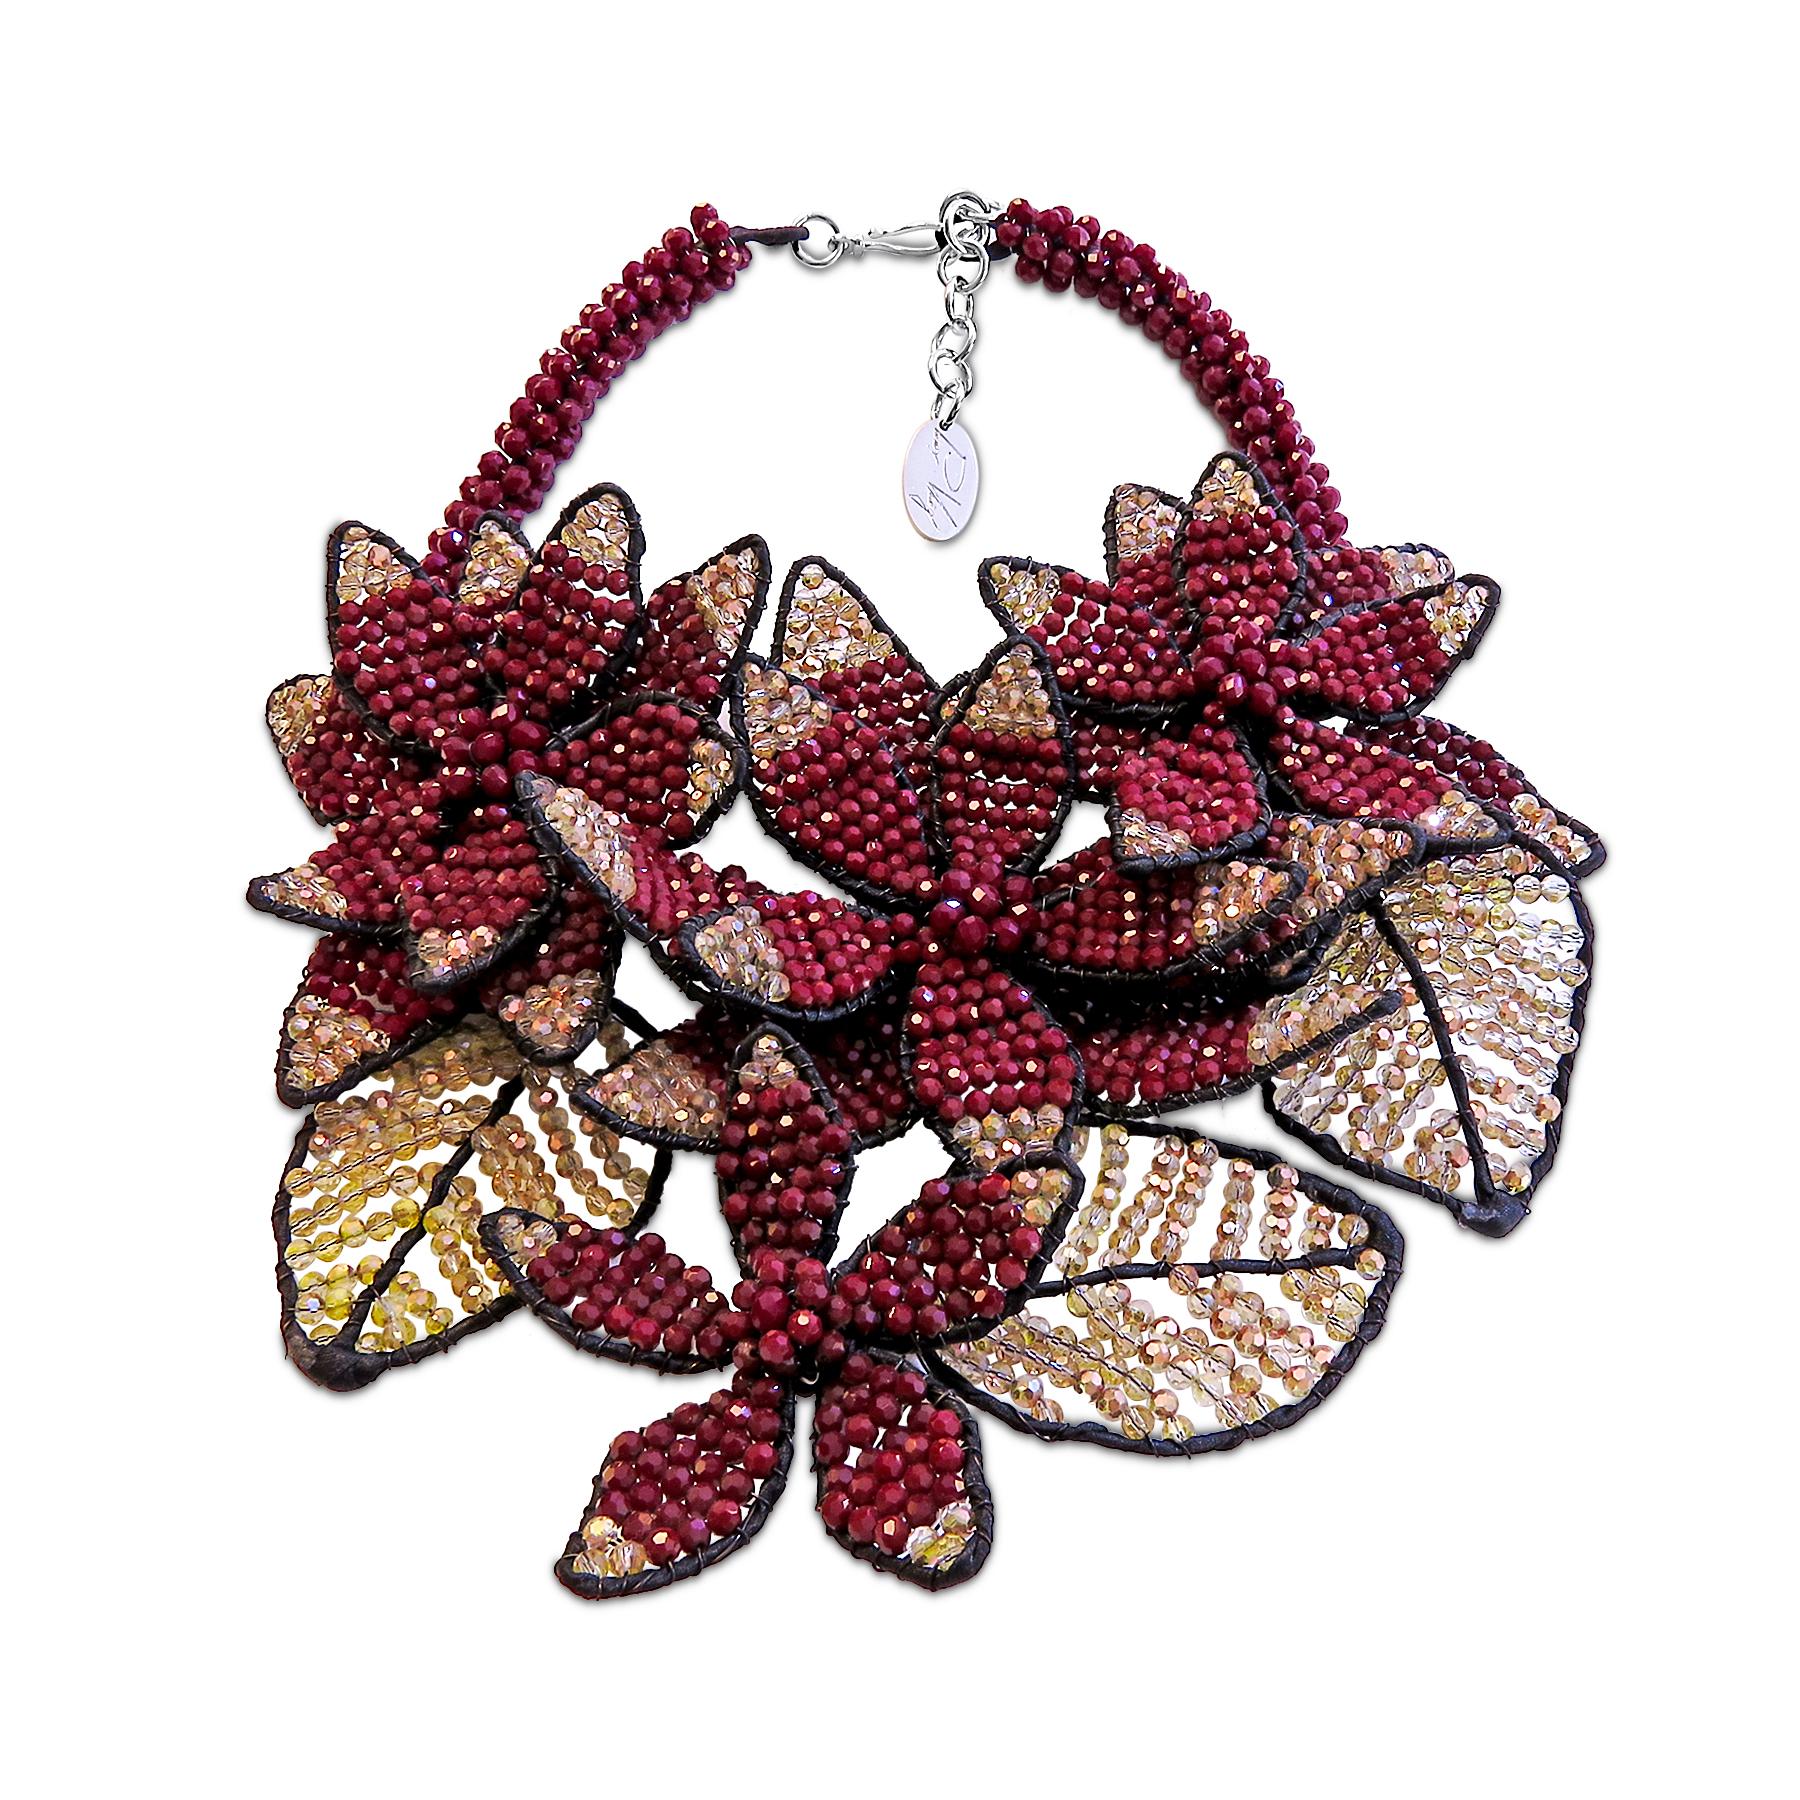 Vilaiwan Jewelry Necklace 
Flower design hand crafted 
one of a kind, rare piece 
red & White crystal 
Up-down from flower point about 6 inches  
18 inches long about 
Width about 6 inches 

Vilaiwan Fine Jewelry is the work of creative artist and